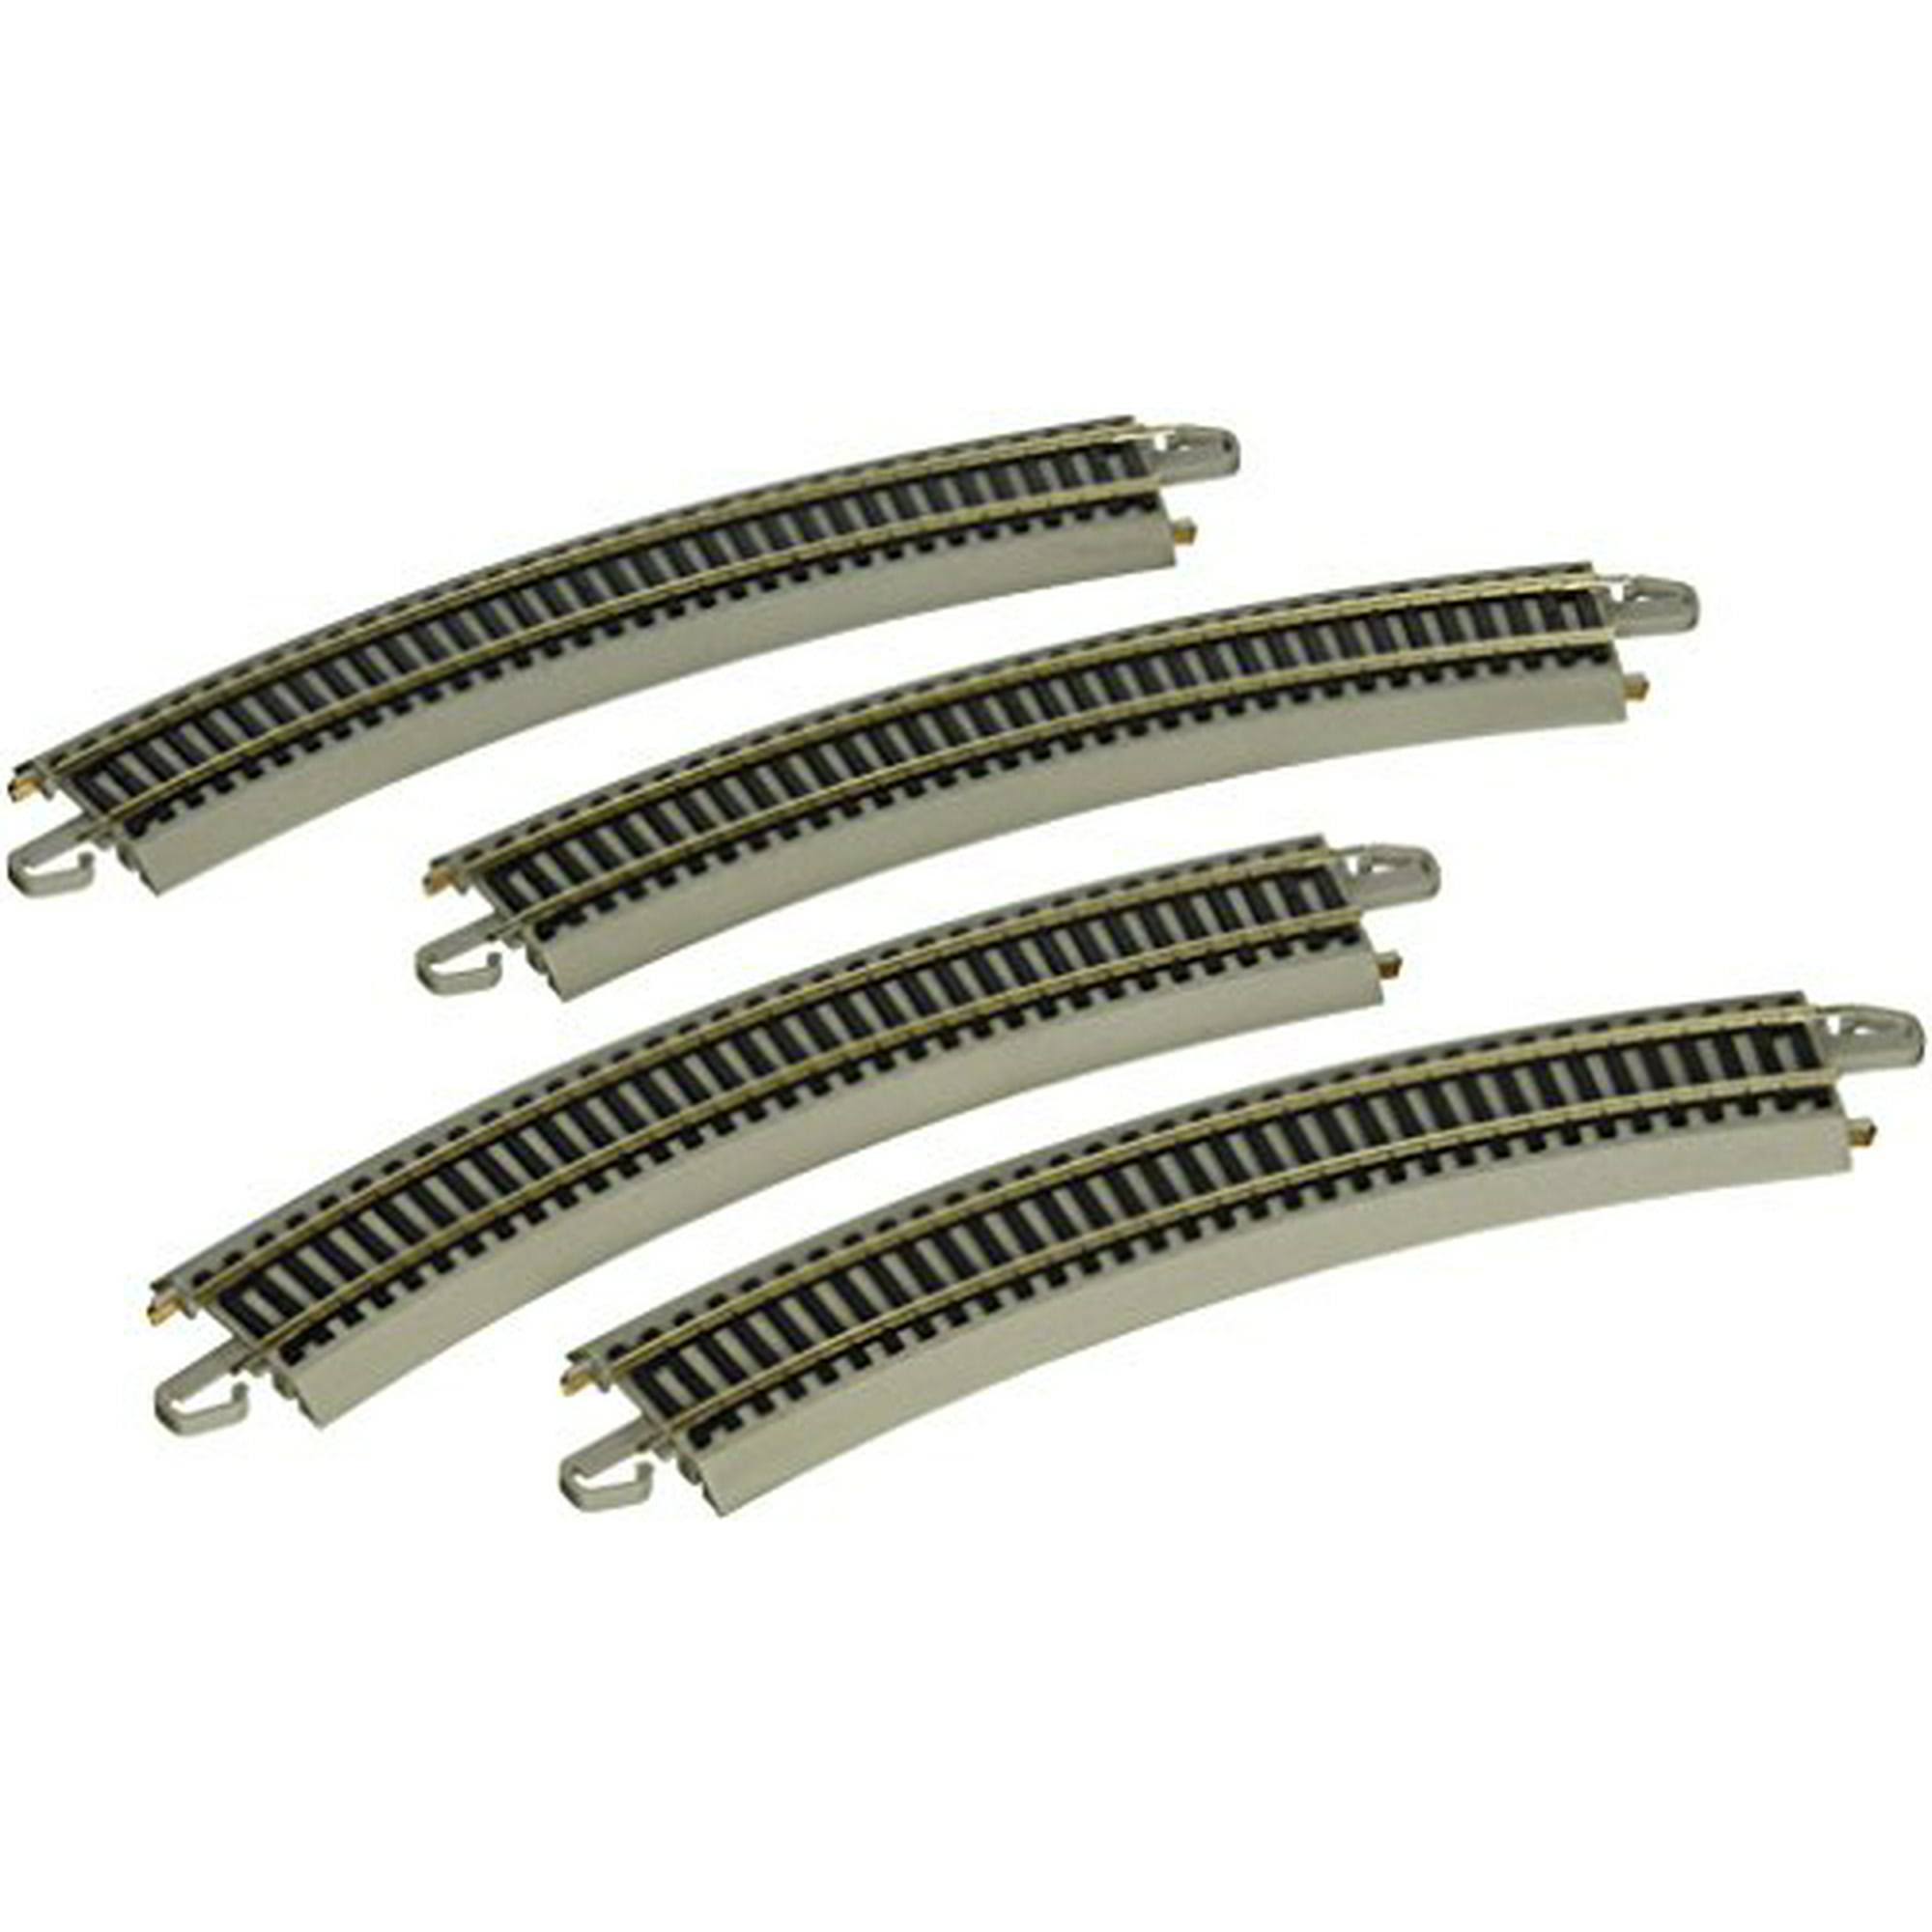 Bachmann Trains Snap-Fit E-Z Track Nickel Silver Reversing 18" Radius Curved Track (4/Card)